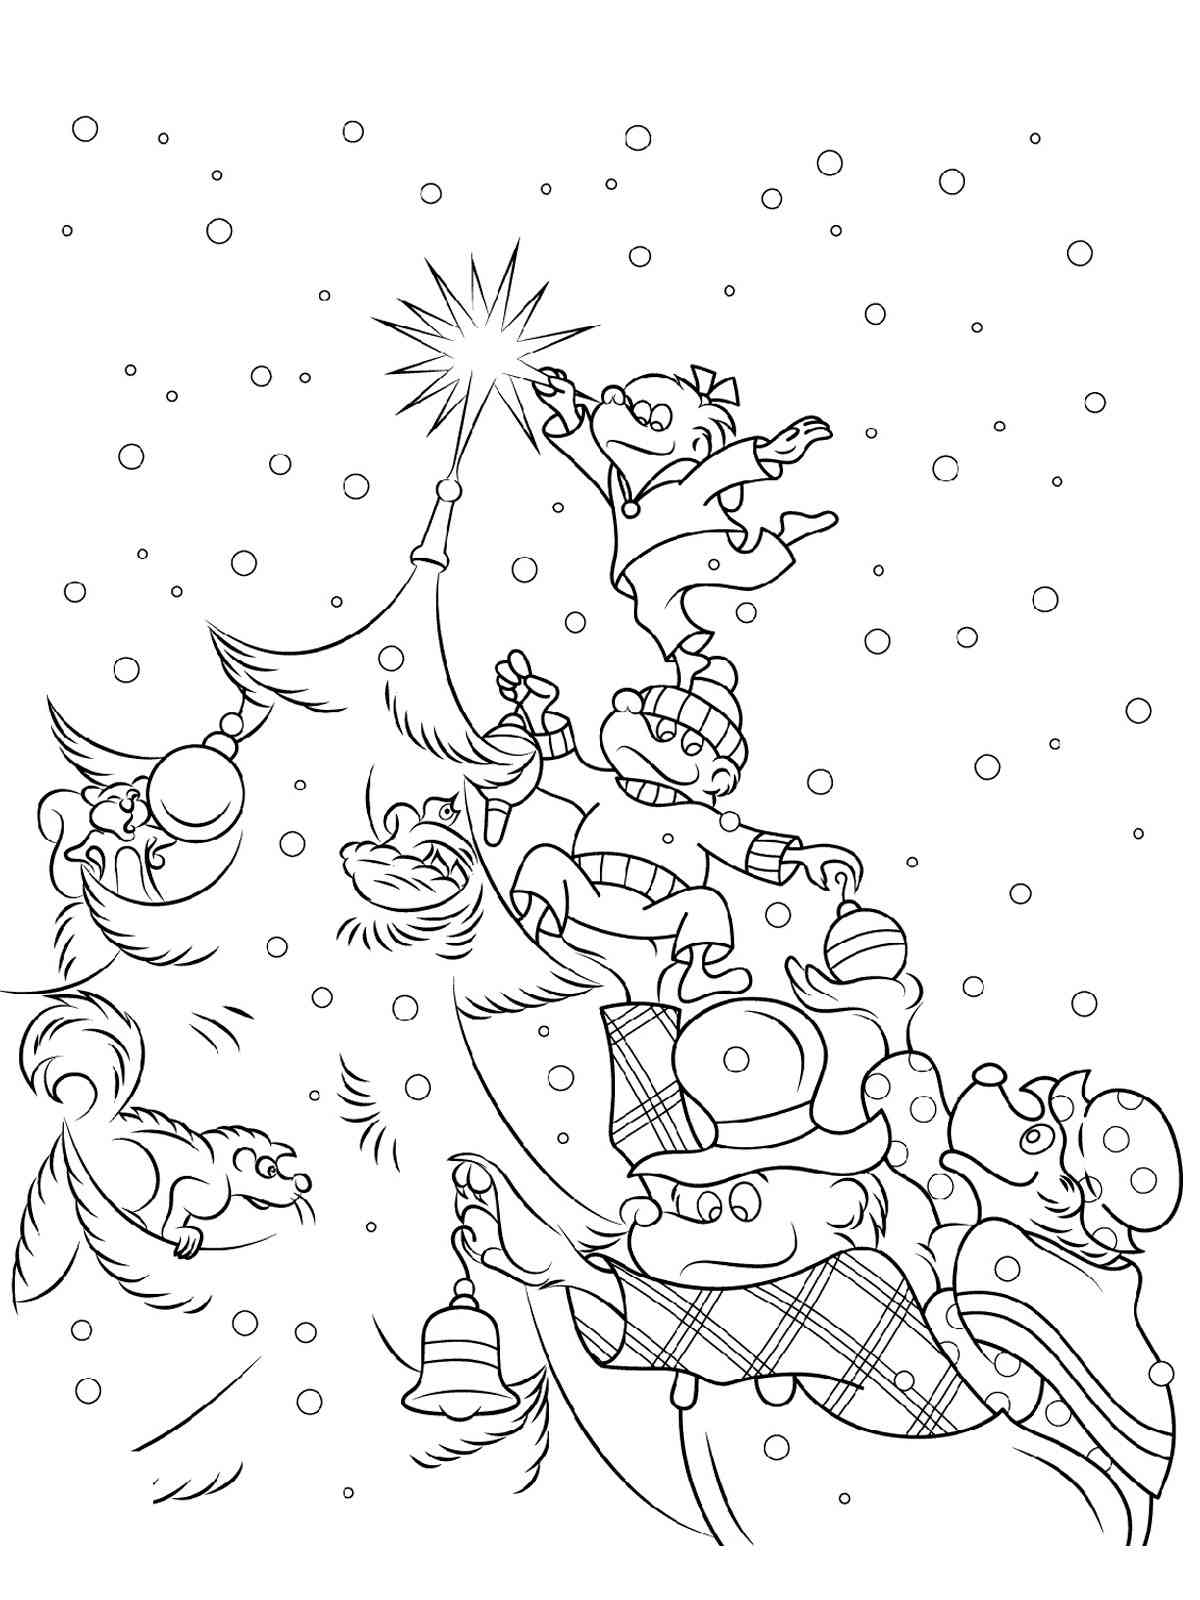 Berenstain Bears Family coloring page